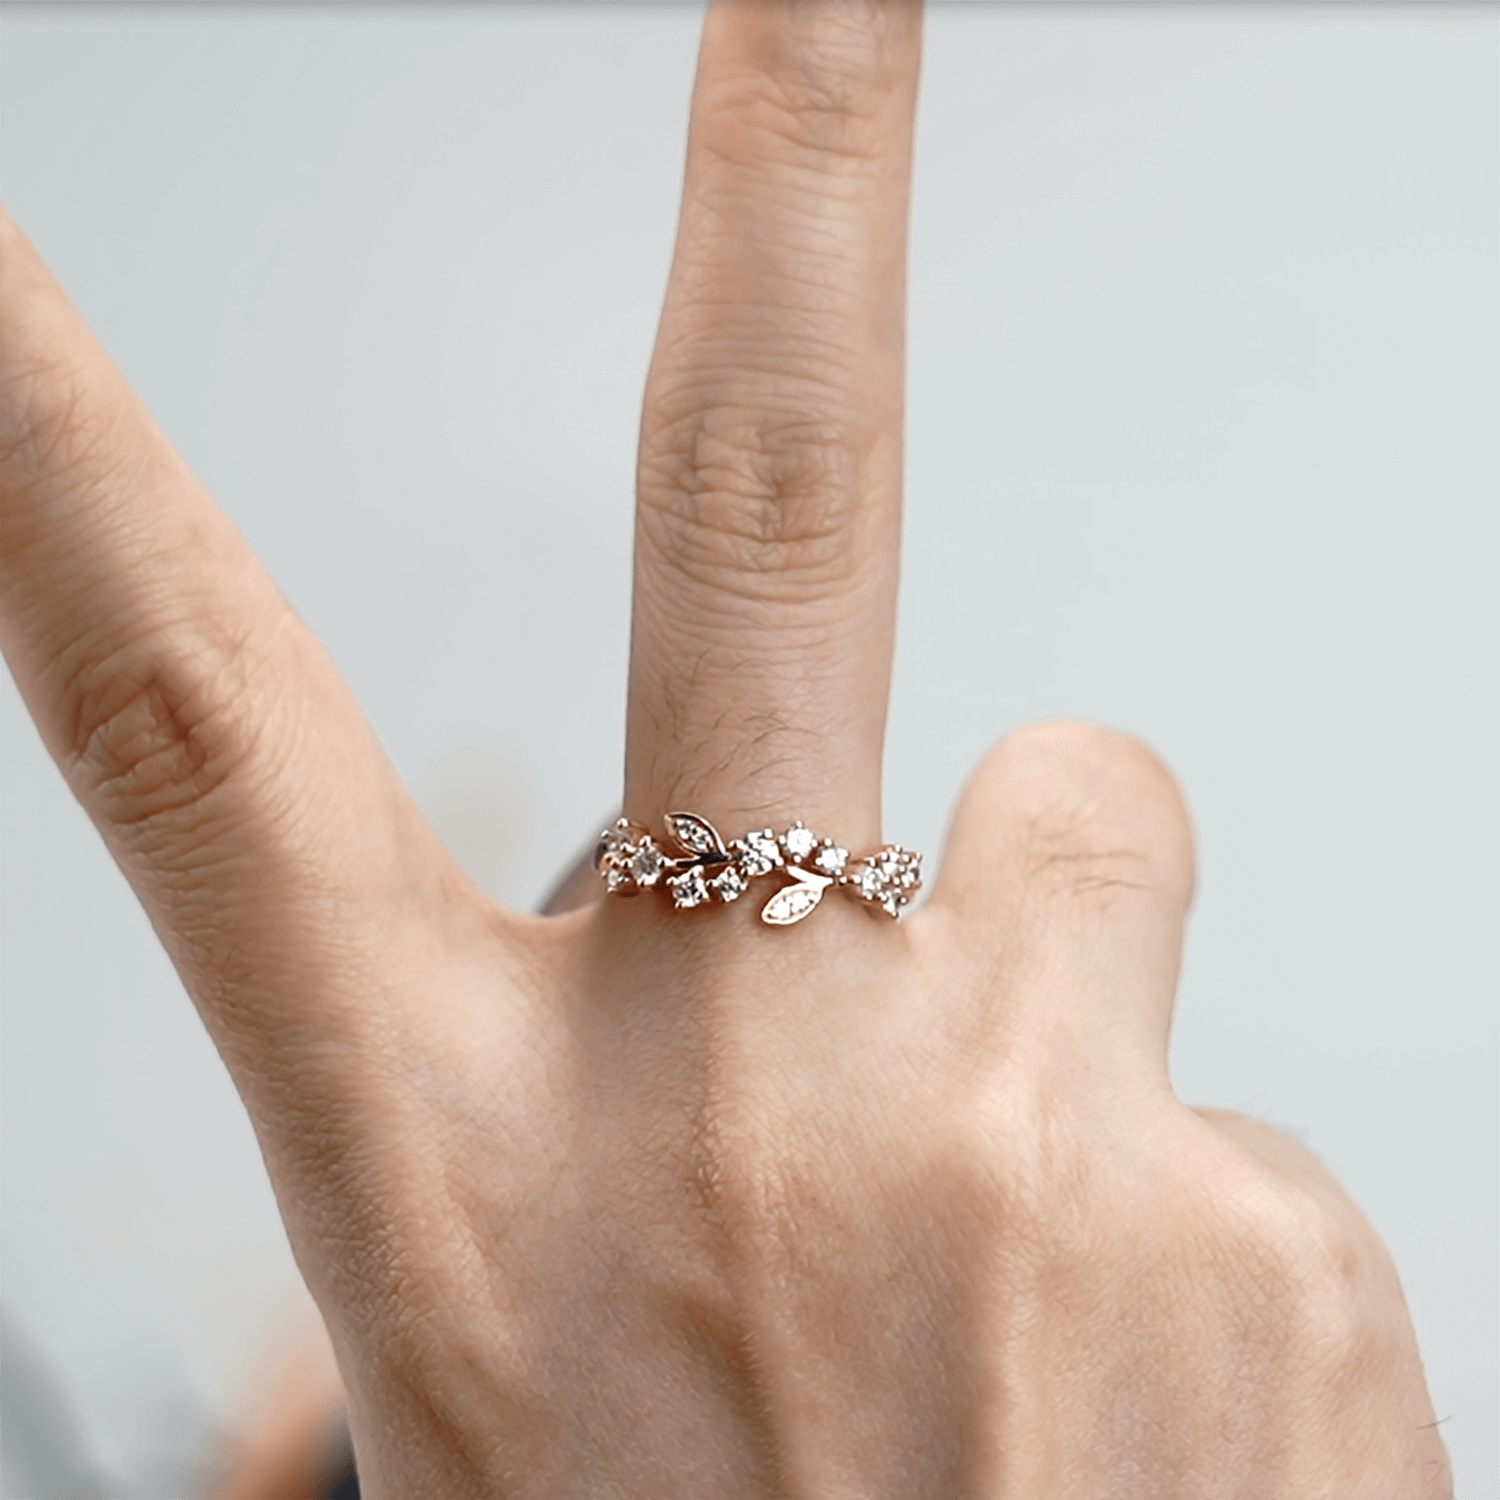 Unique Leaf Moissanite Wedding Ring Women Dainty Rings solid gold band anniversary rings for women gift for her